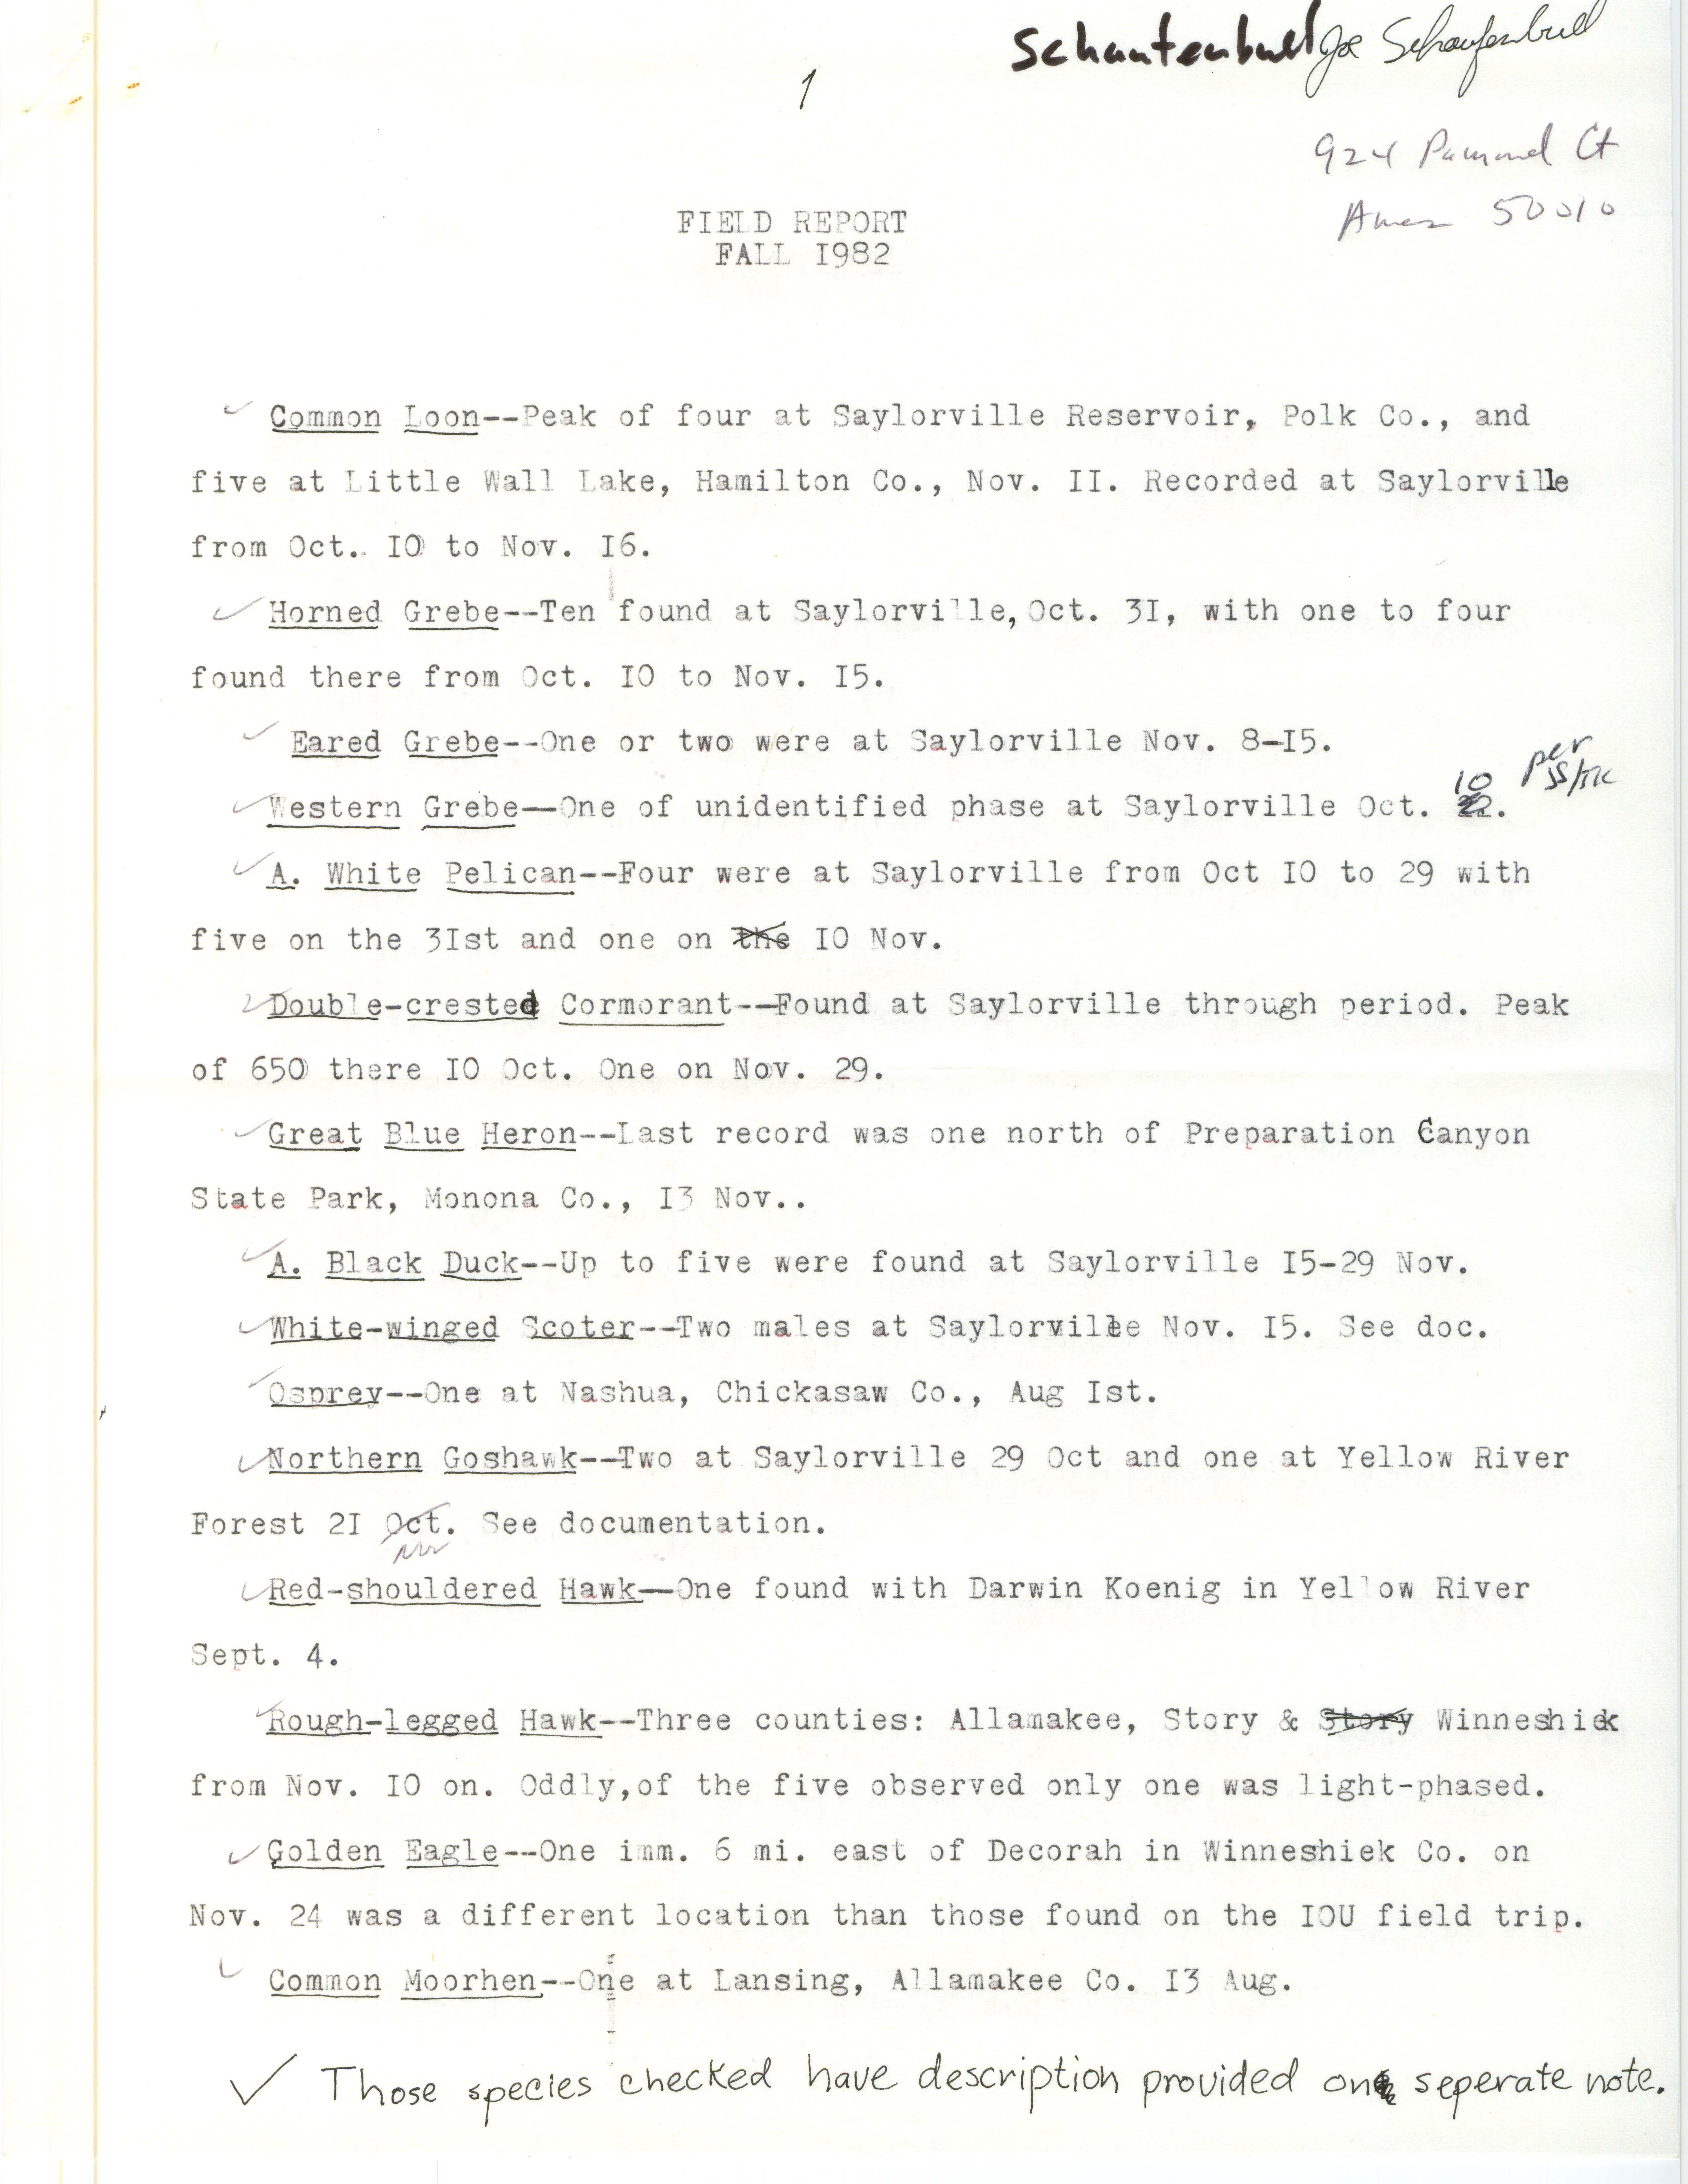 Field notes contributed by Joseph P. Schaufenbuel, fall 1982